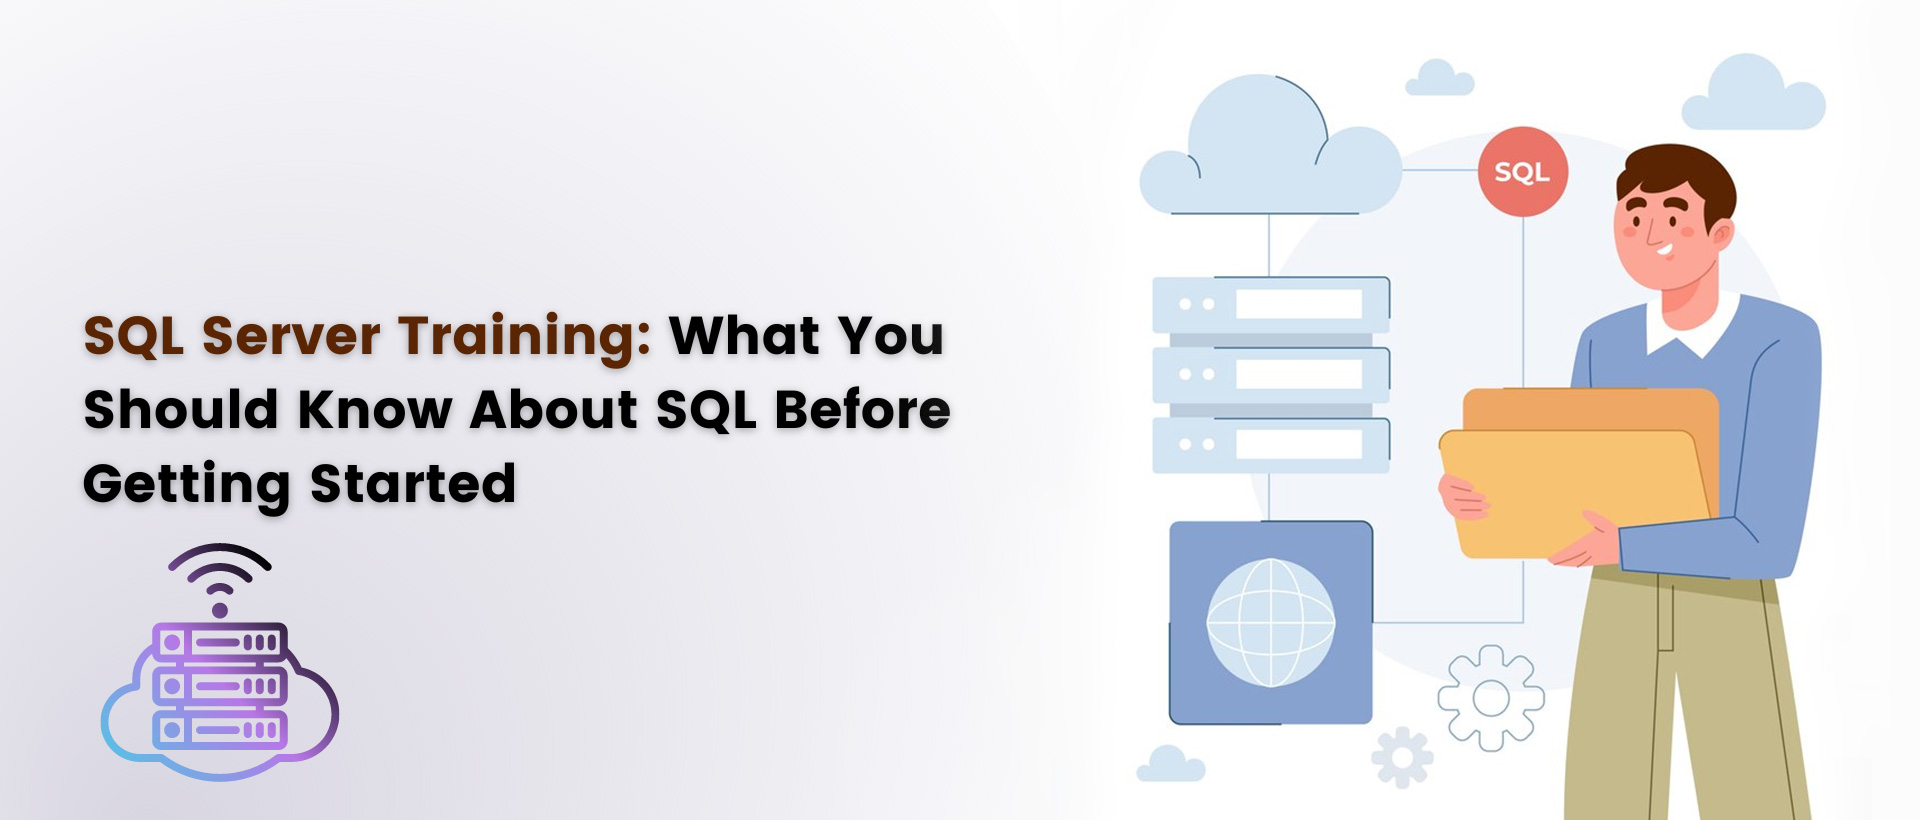 SQL Server Training: What You Should Know About SQL Before Getting Started